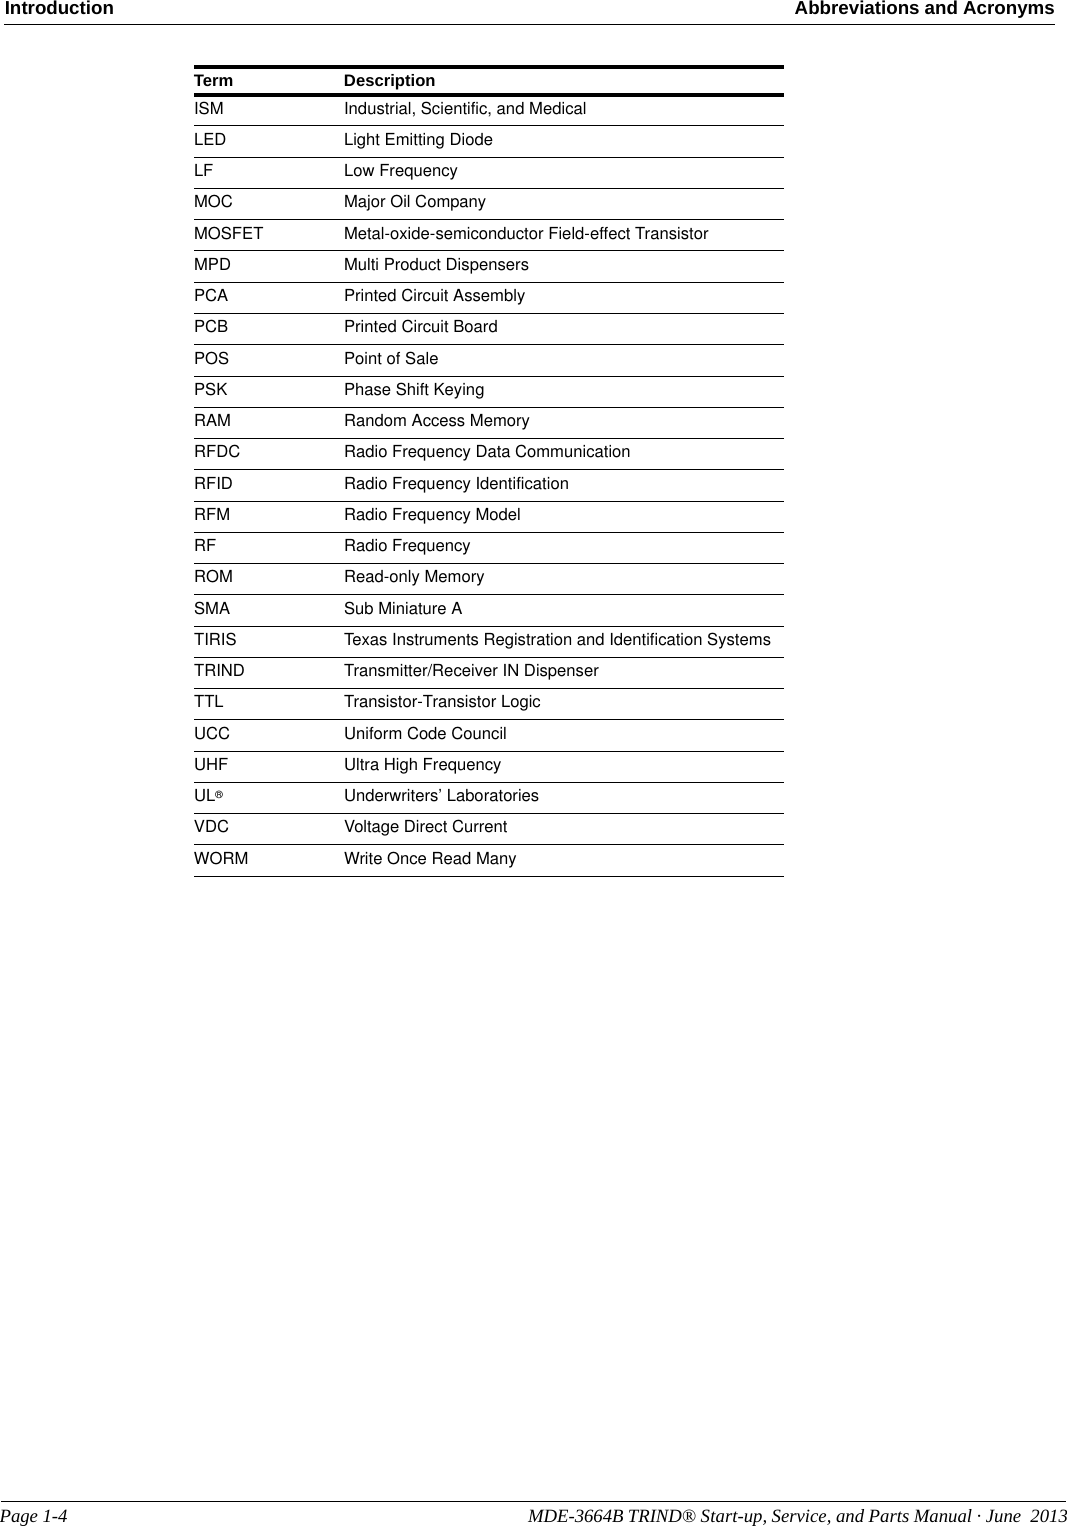 Page 1-4                                                                                                     MDE-3664B TRIND® Start-up, Service, and Parts Manual · June  2013Introduction Abbreviations and AcronymsISM Industrial, Scientific, and MedicalLED Light Emitting DiodeLF Low FrequencyMOC Major Oil CompanyMOSFET Metal-oxide-semiconductor Field-effect TransistorMPD Multi Product DispensersPCA Printed Circuit AssemblyPCB Printed Circuit BoardPOS Point of SalePSK Phase Shift KeyingRAM Random Access MemoryRFDC Radio Frequency Data CommunicationRFID Radio Frequency IdentificationRFM Radio Frequency ModelRF Radio FrequencyROM Read-only MemorySMA Sub Miniature ATIRIS Texas Instruments Registration and Identification SystemsTRIND Transmitter/Receiver IN DispenserTTL Transistor-Transistor LogicUCC Uniform Code CouncilUHF Ultra High FrequencyUL®Underwriters’ LaboratoriesVDC Voltage Direct CurrentWORM Write Once Read ManyTerm Description